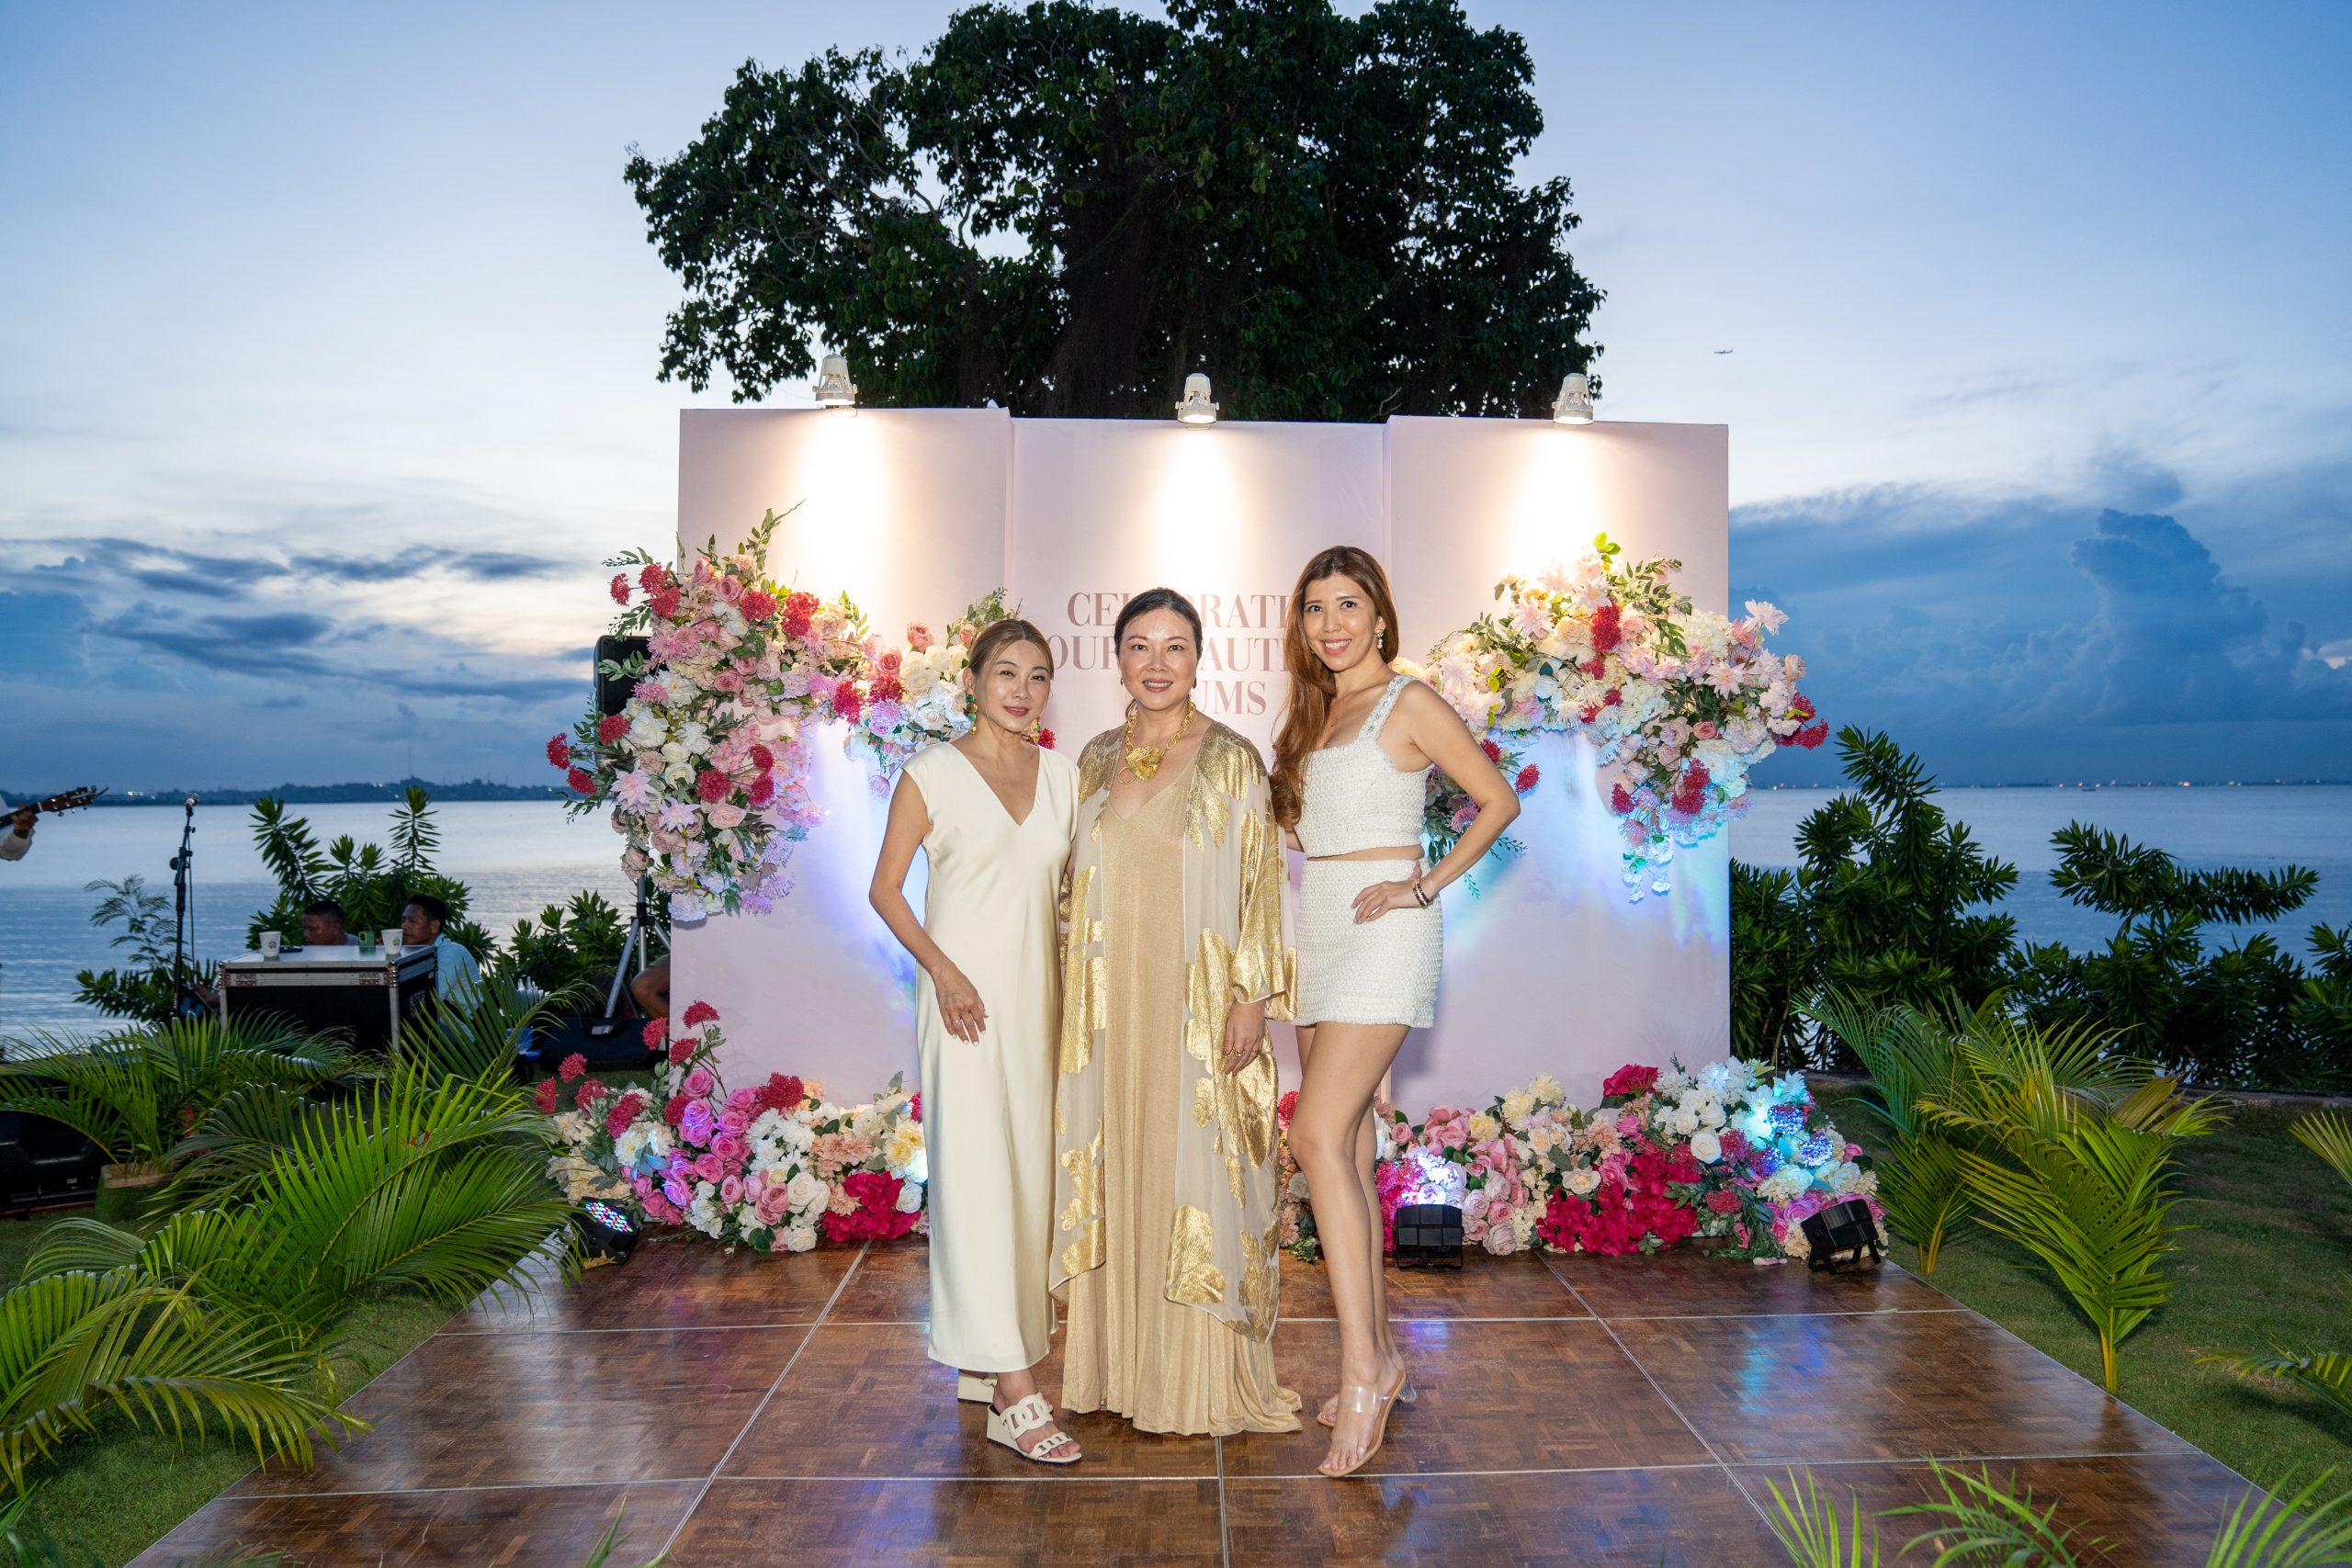 Sabrina, founder of Skin Inc, Leny Suparman, group CEO of KOP Properties, and Gidania, co-founder of Mummyfique